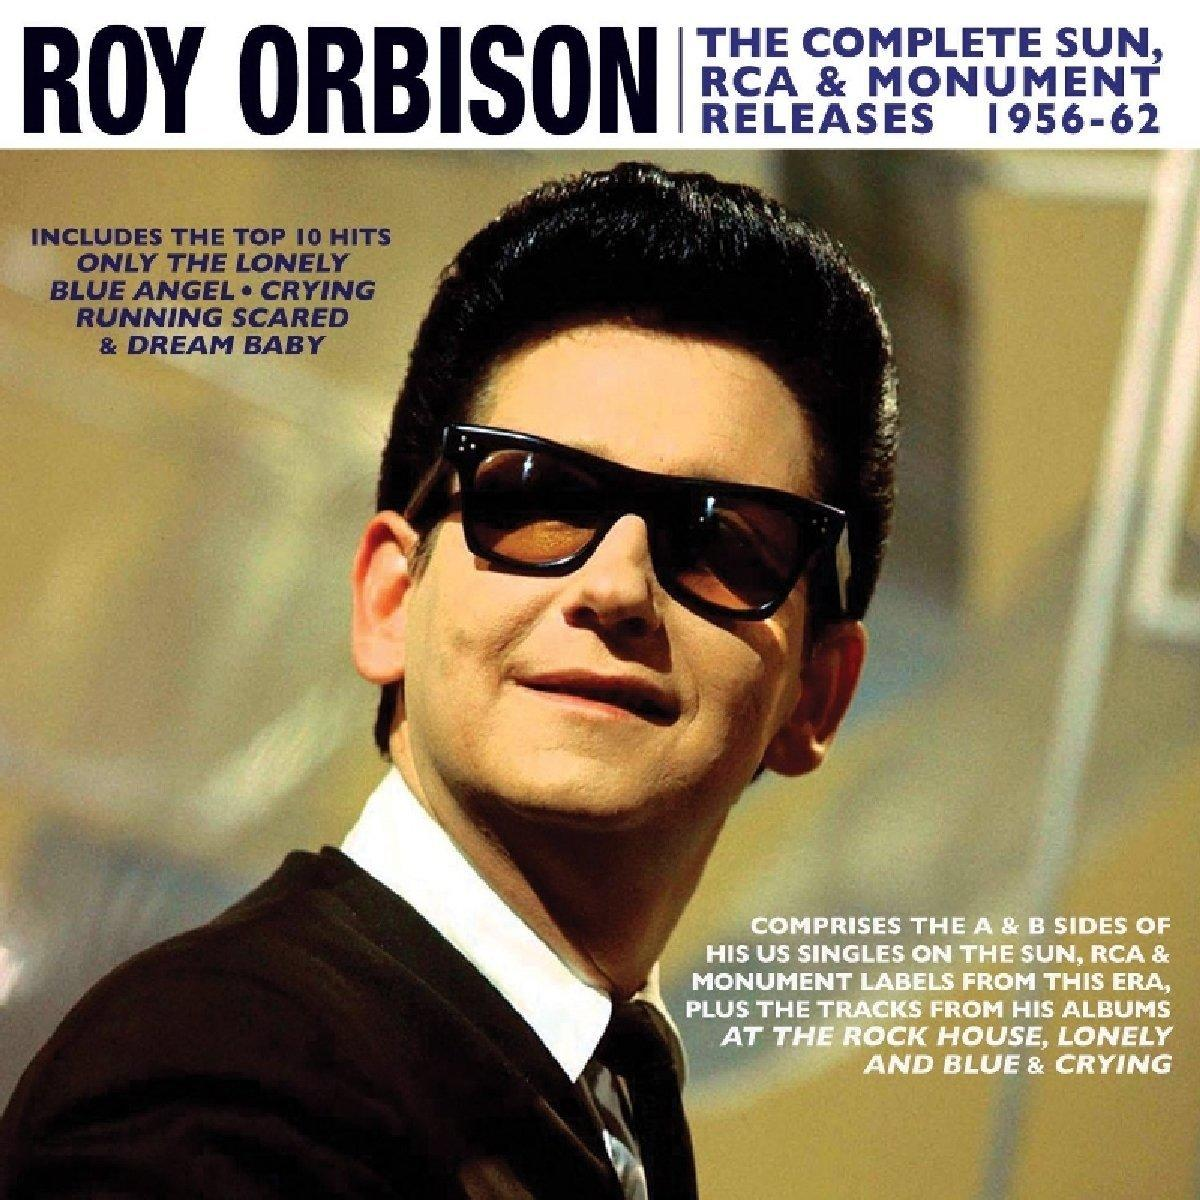 & (CD) Orbison Sun, Releases - Complete - RCA Monument 1956-62 Roy The